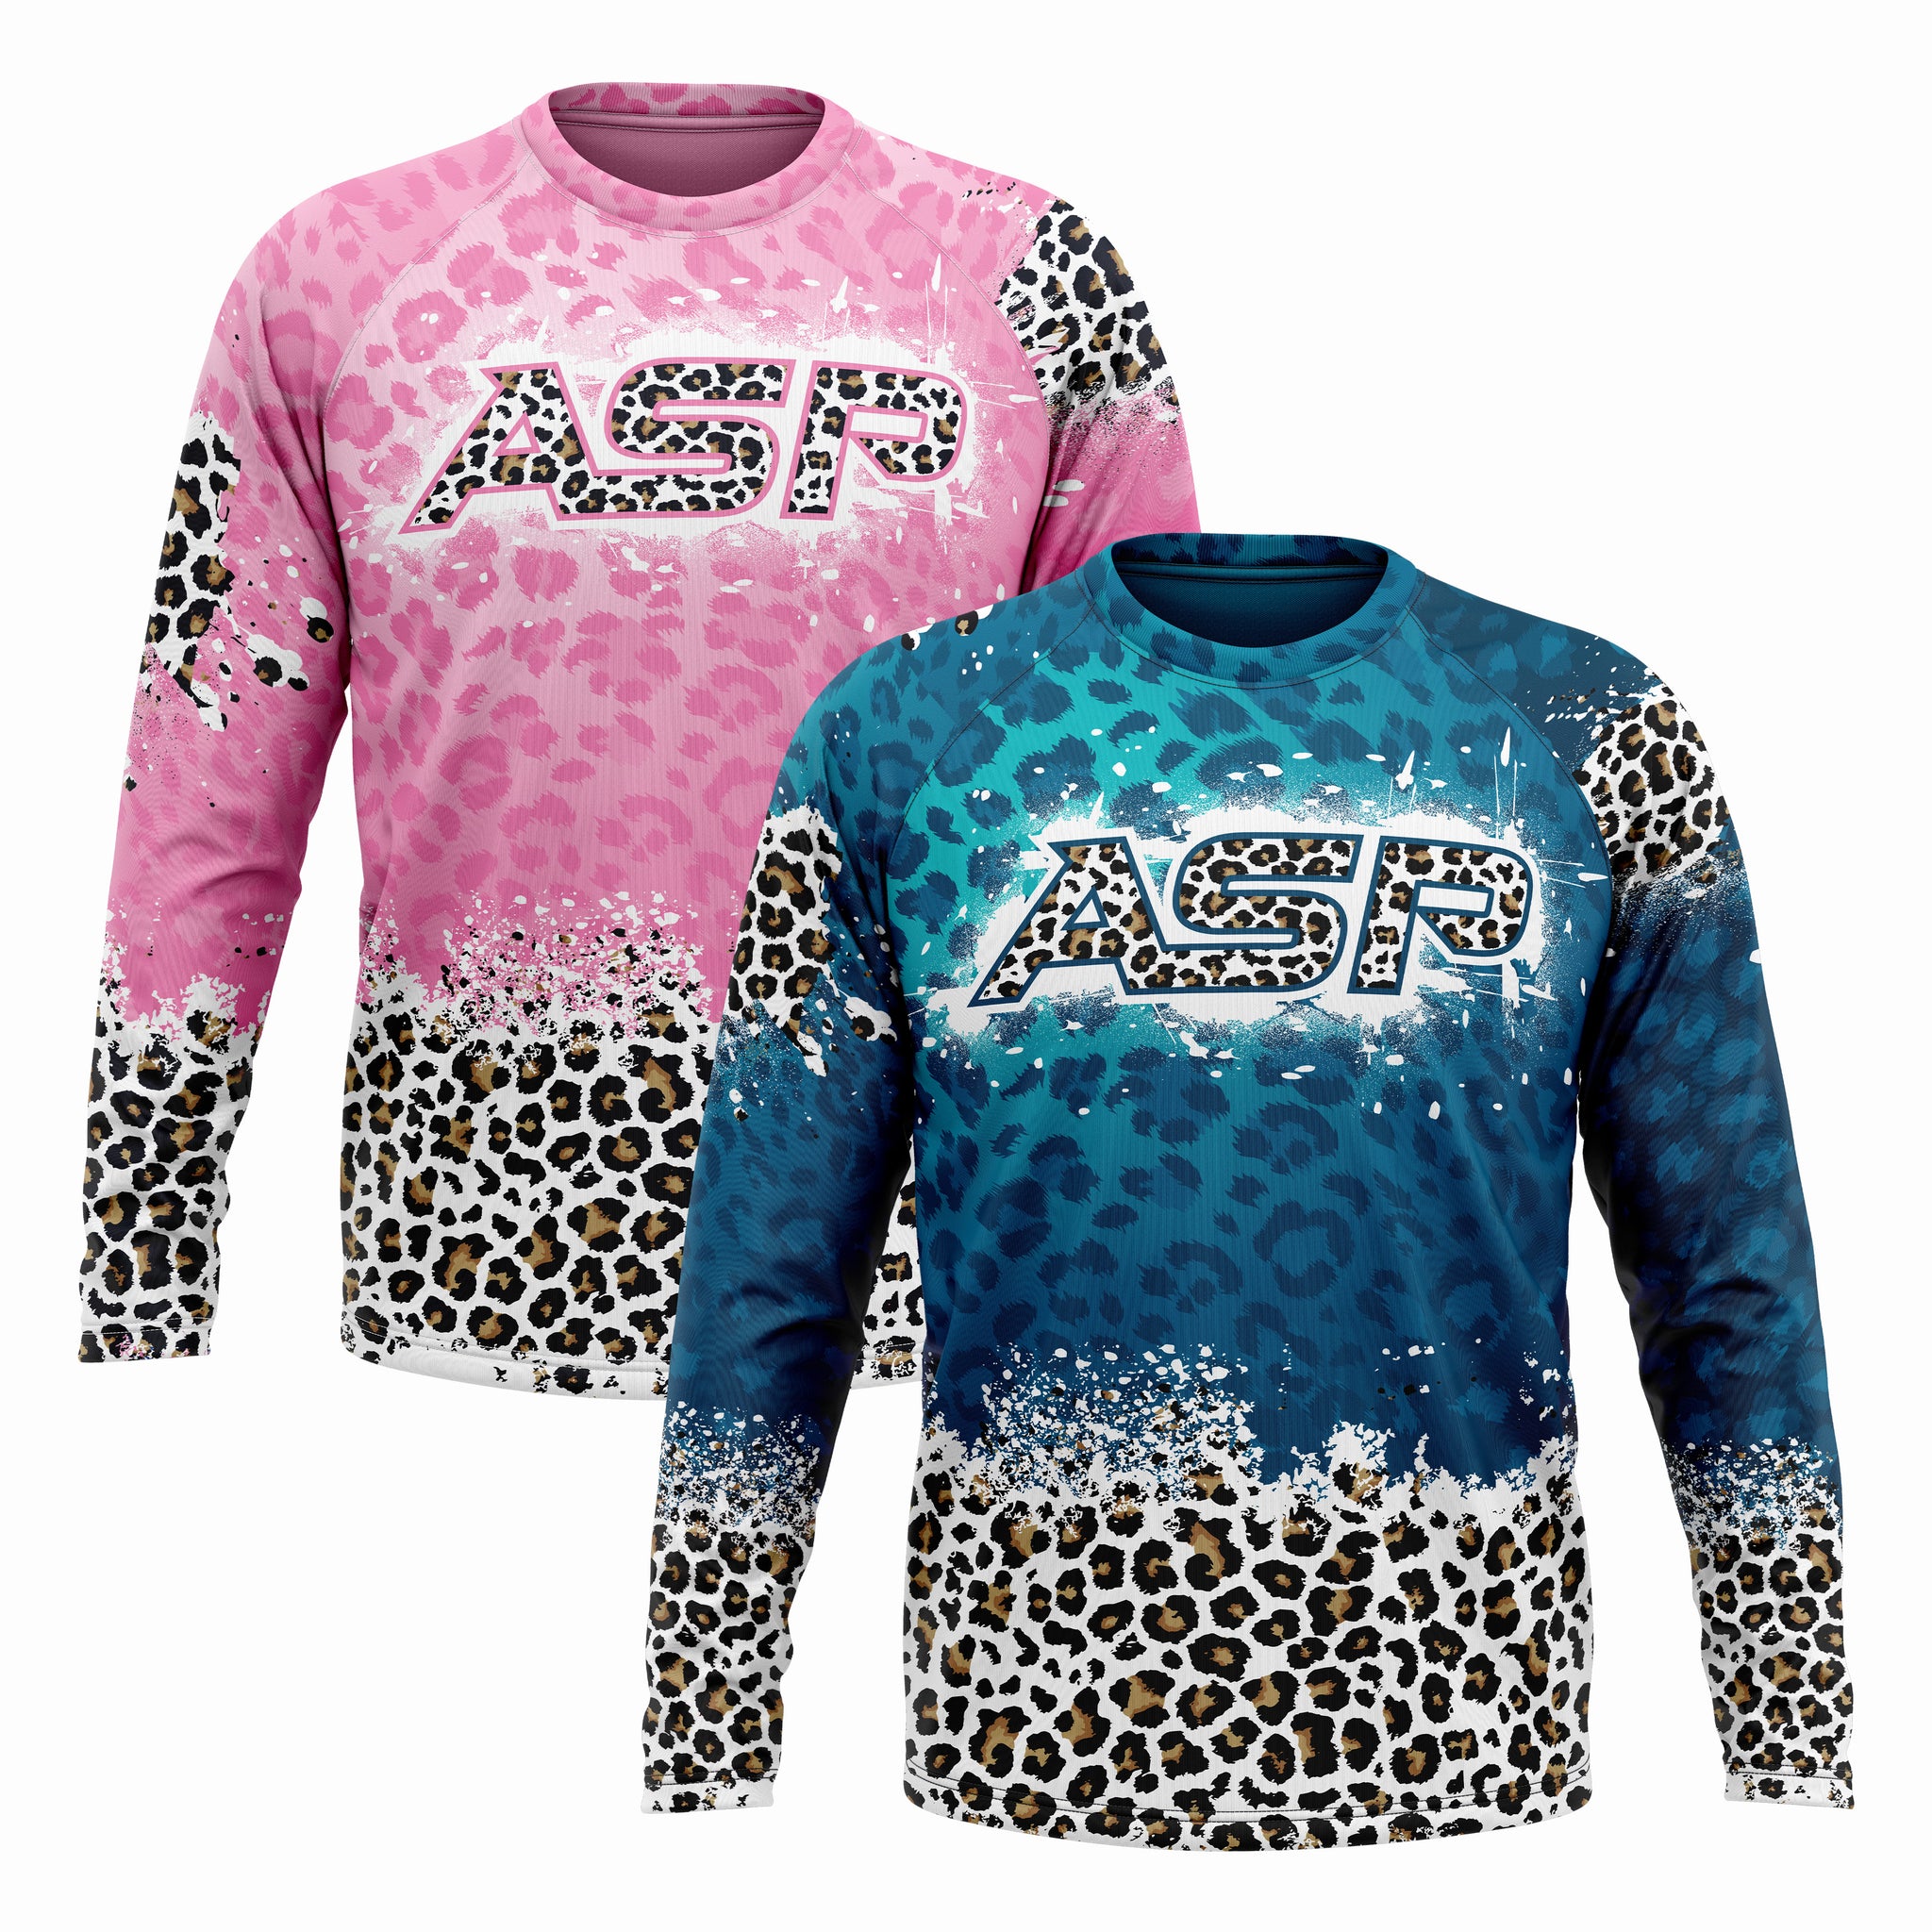 ASP Lux 1.0 Long Sleeve